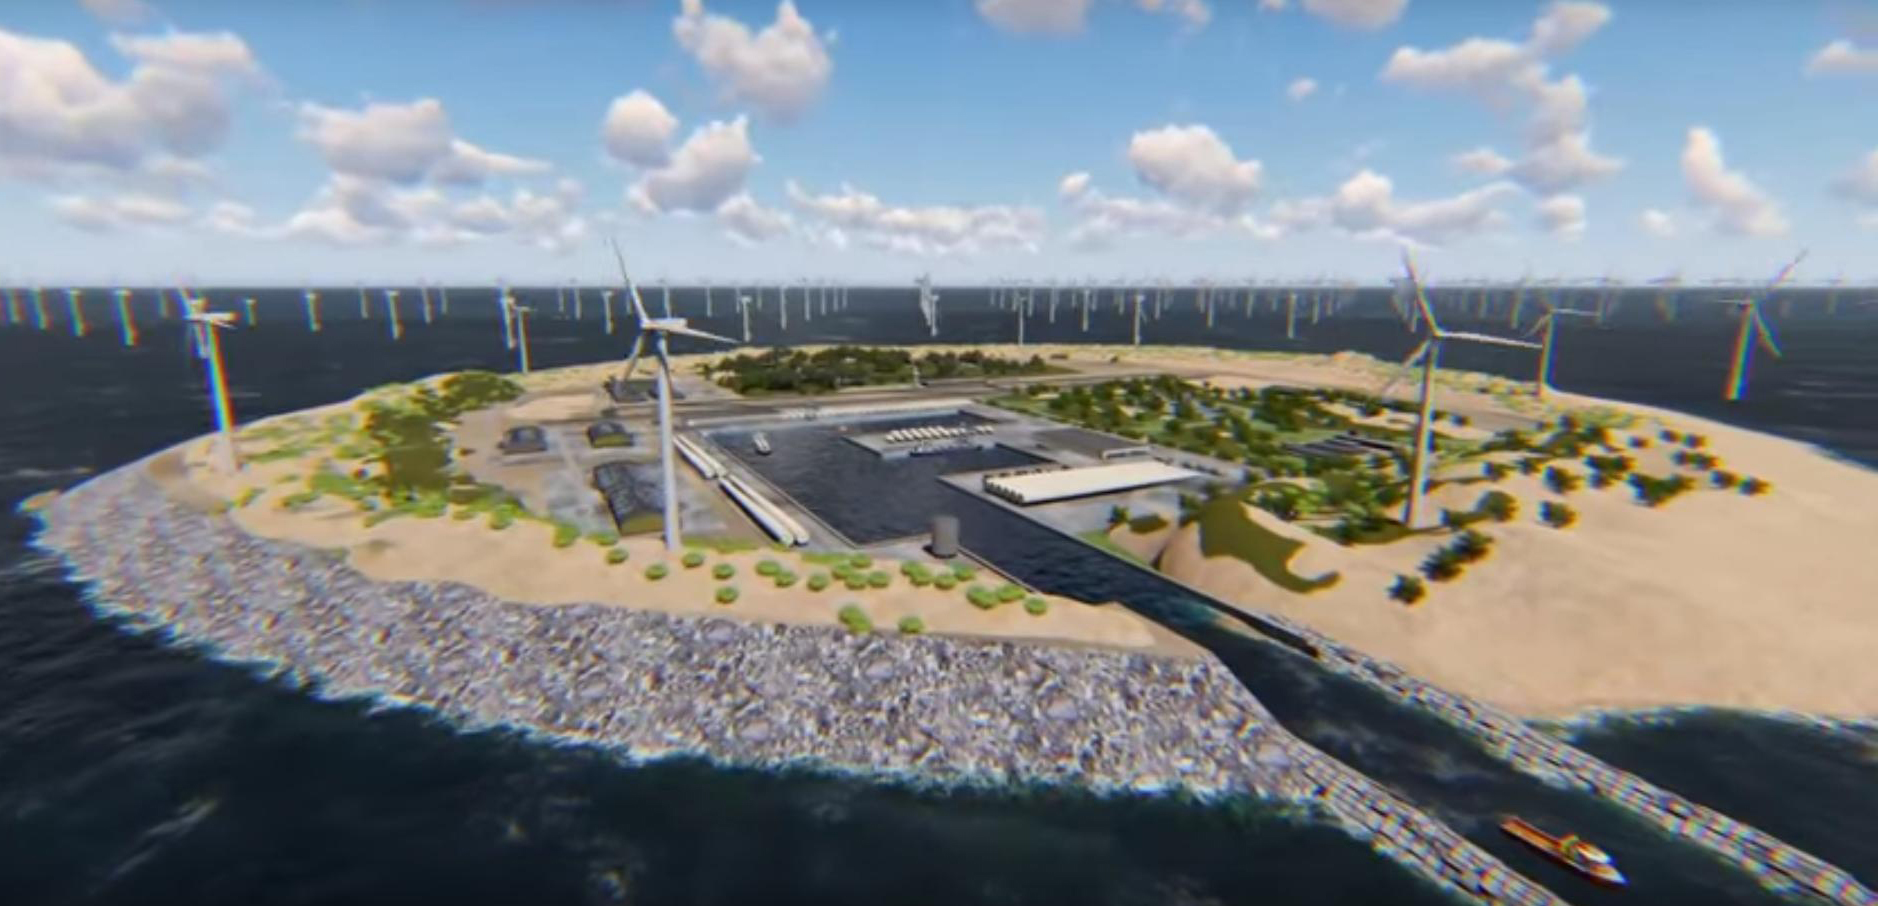 The TenneT vision for an offshore wind farm island hub